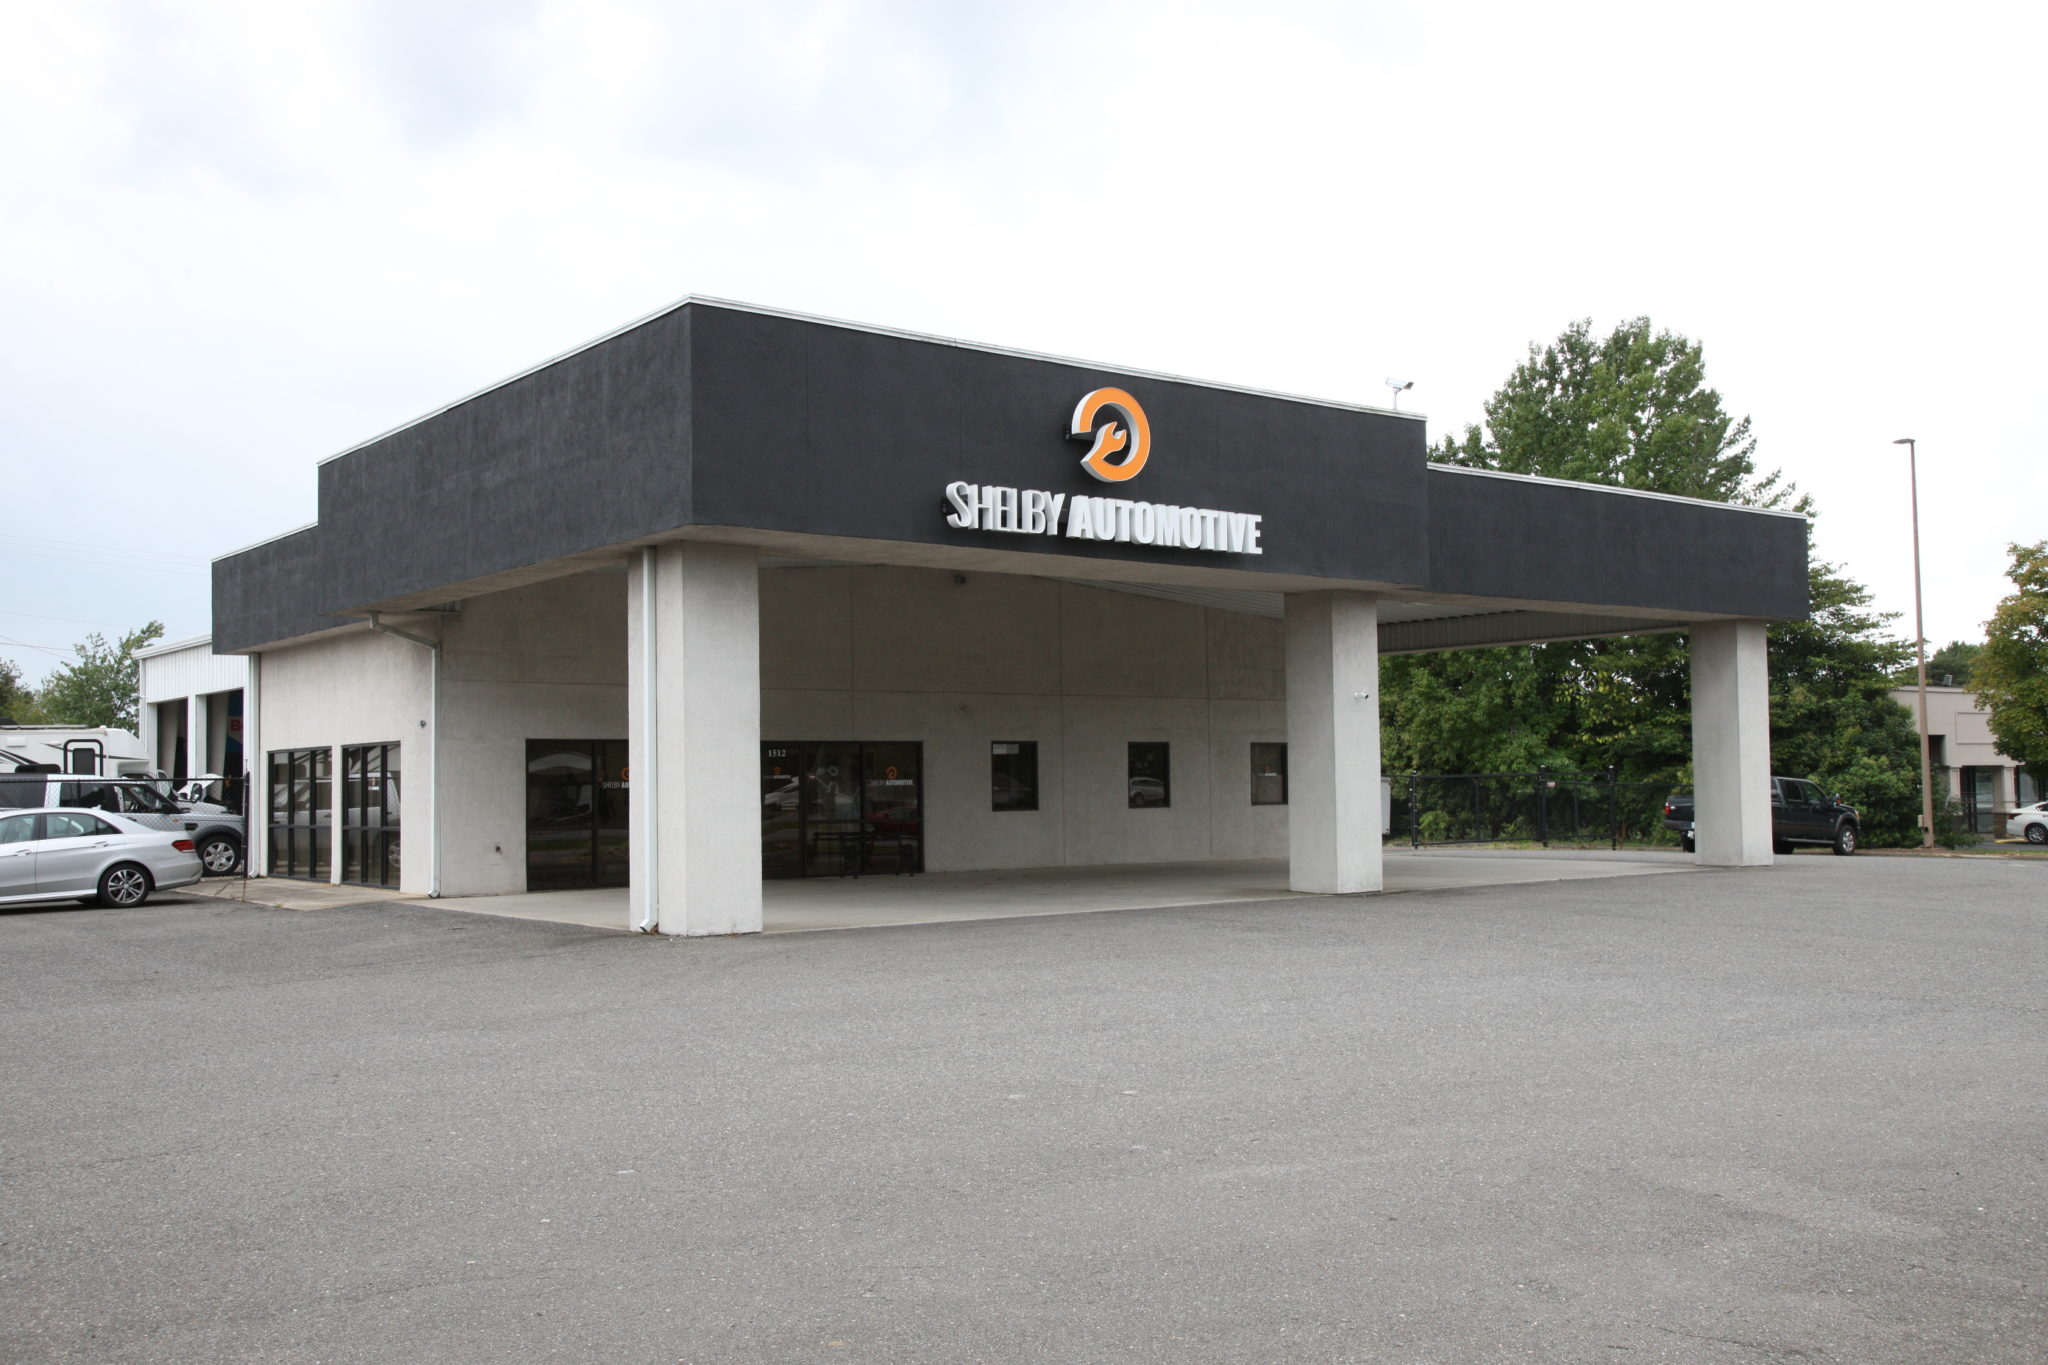 Shelby Automotive - formerly J&E Sales..Service and Repair on all Makes and Models.